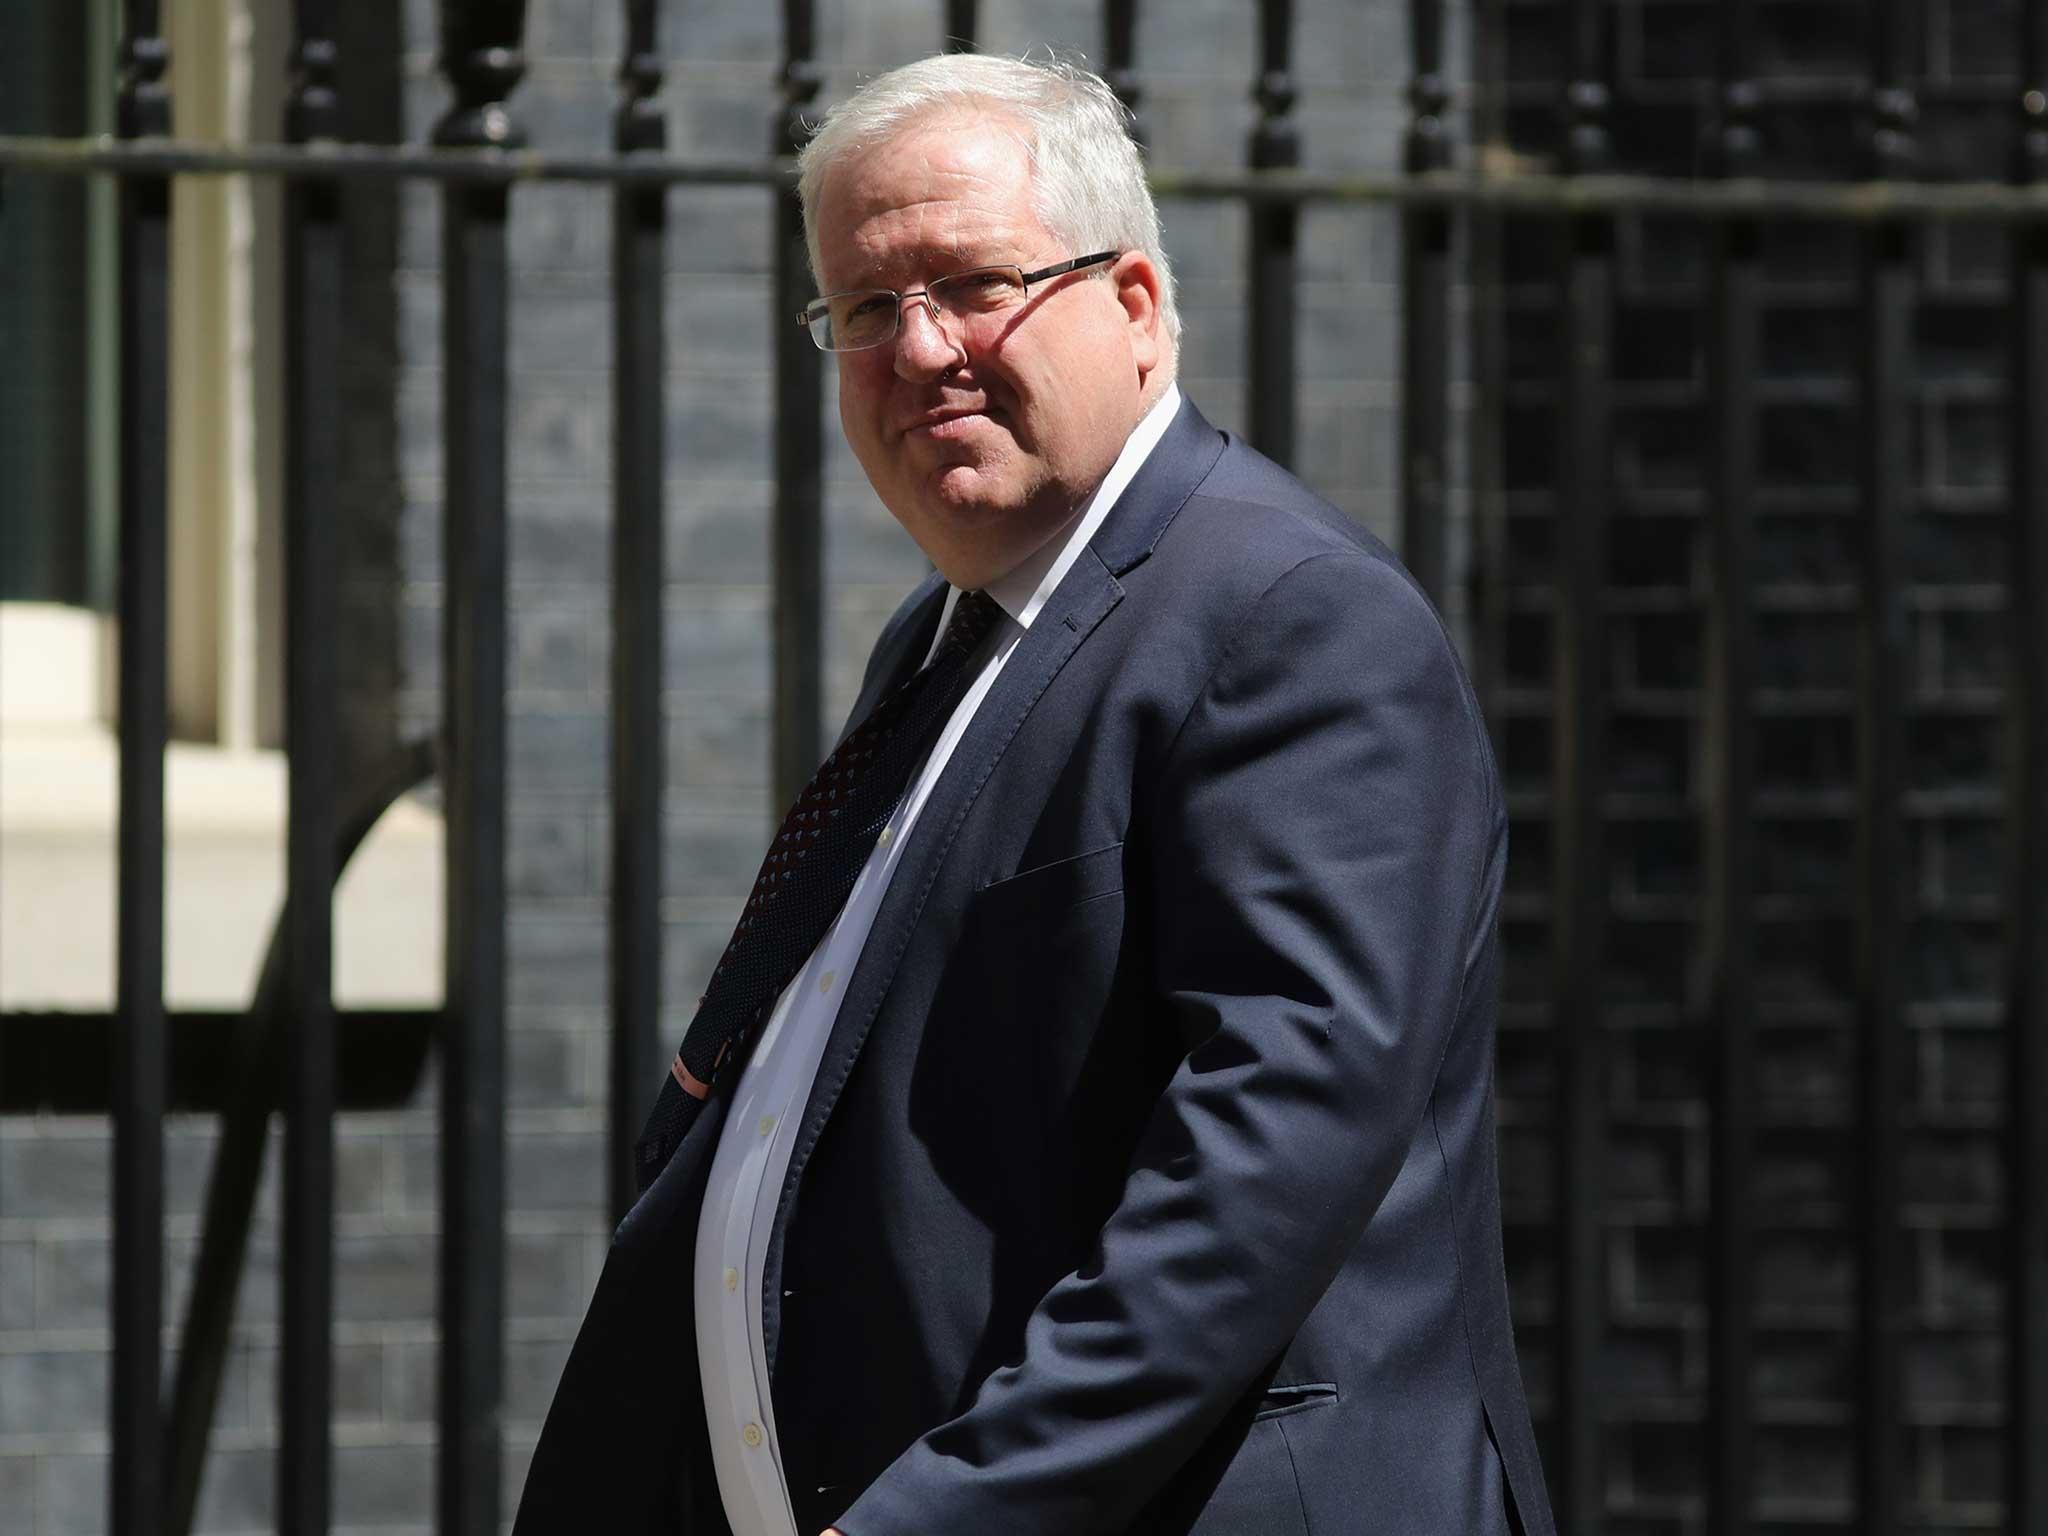 Patrick McLoughlin is chair of the Conservative party